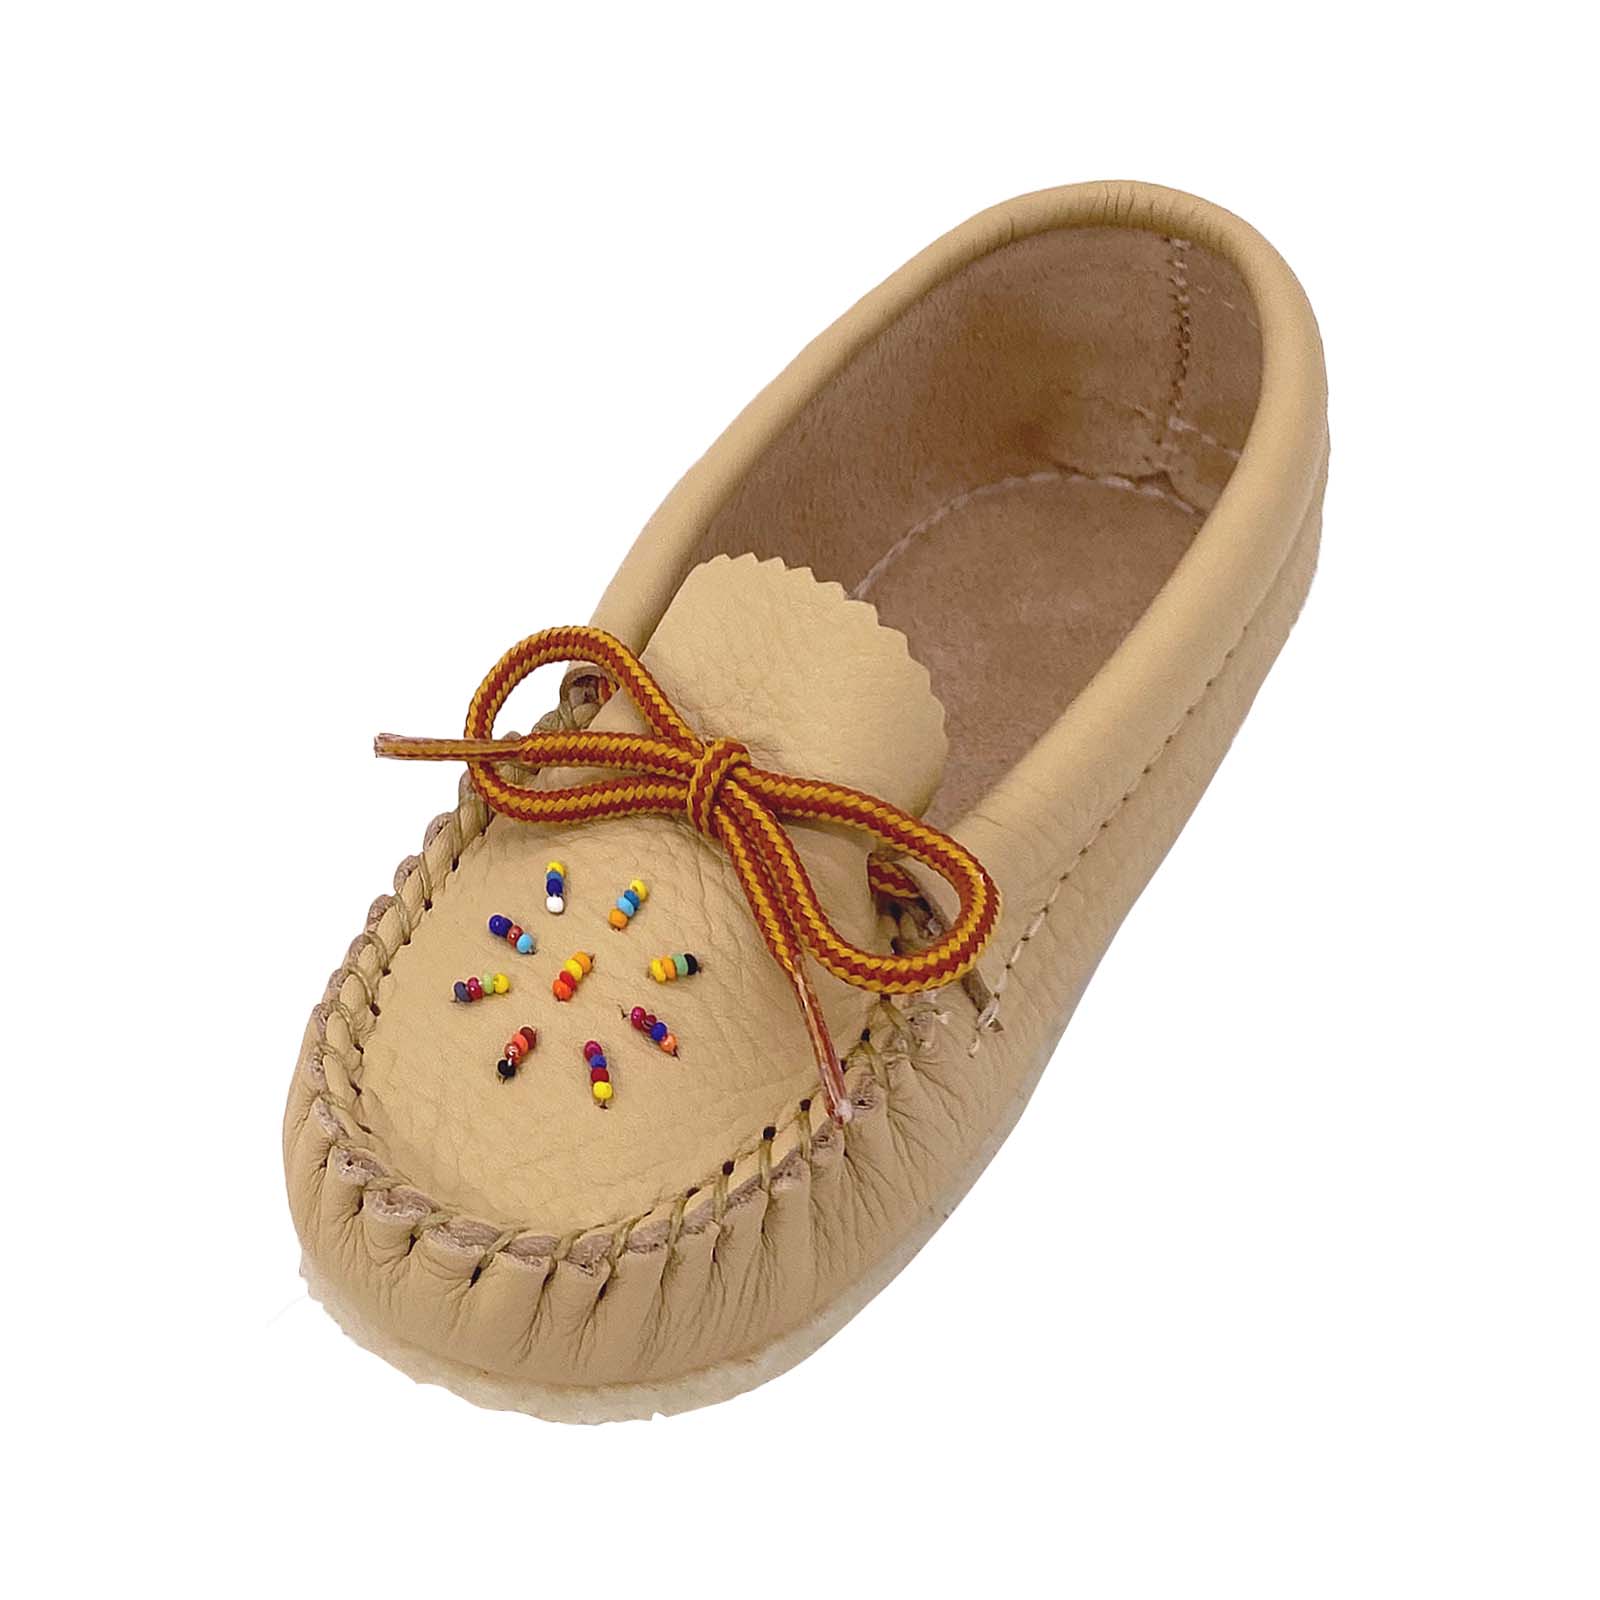 Children's Beaded Moccasins Shoes